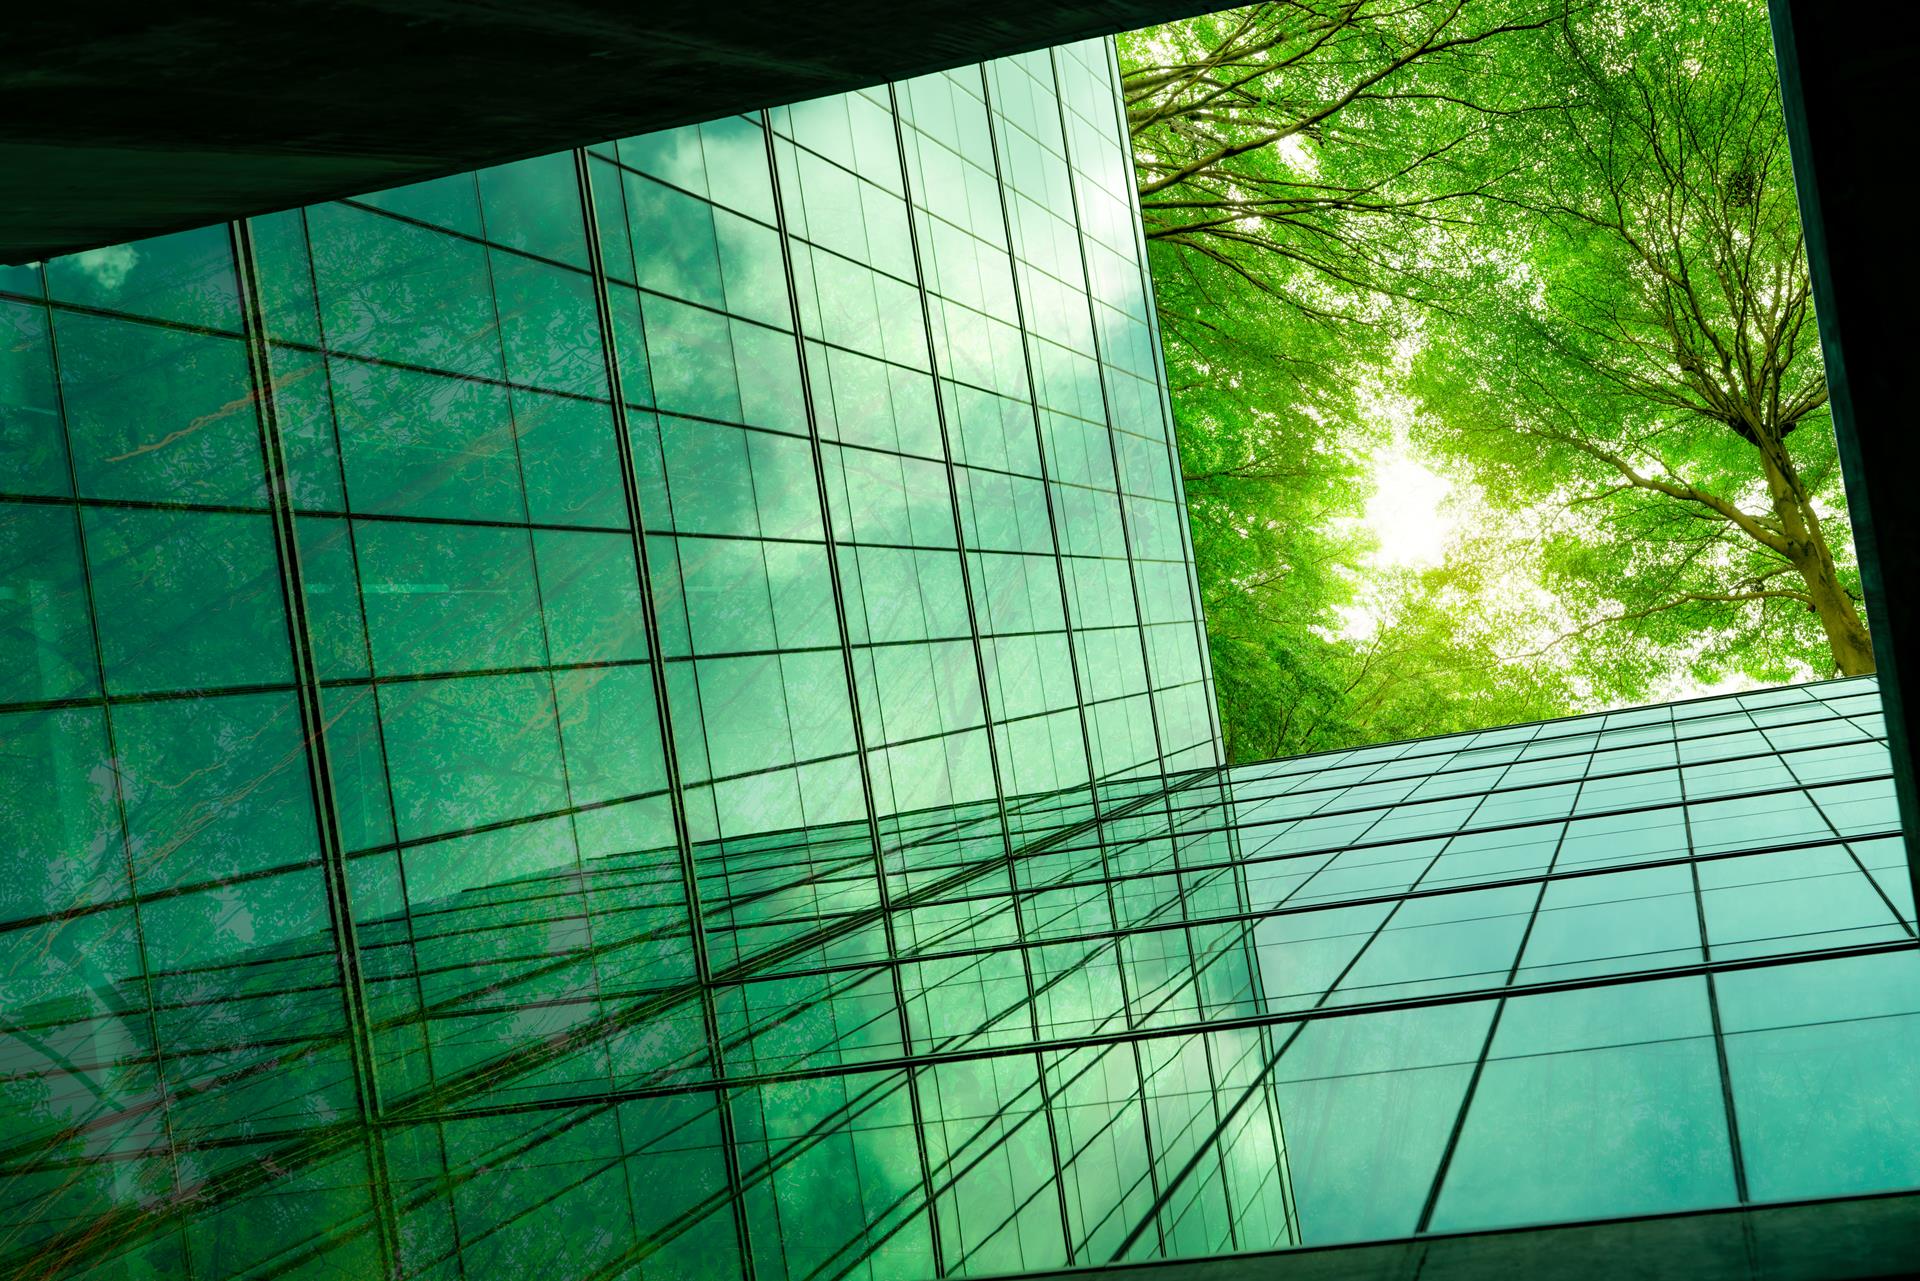 What's the impact of ESG - Environmental, Social and Governance?